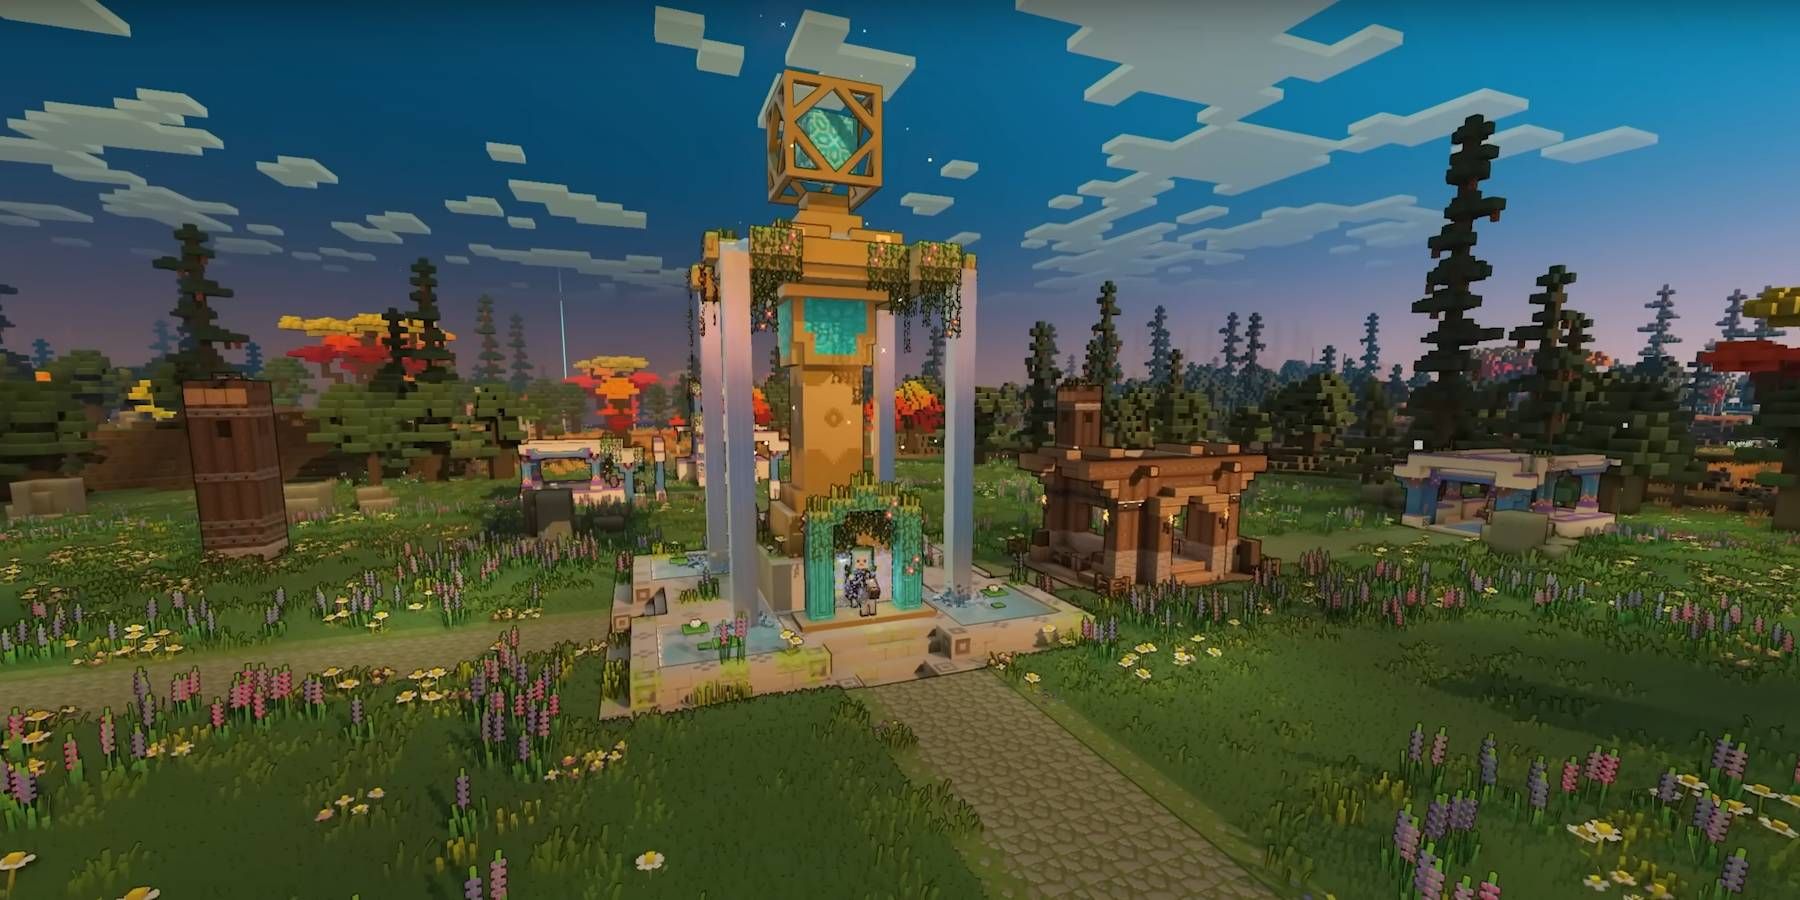 Minecraft Legends Village Fountain for Fast Travel with Villager Chest Located Close By